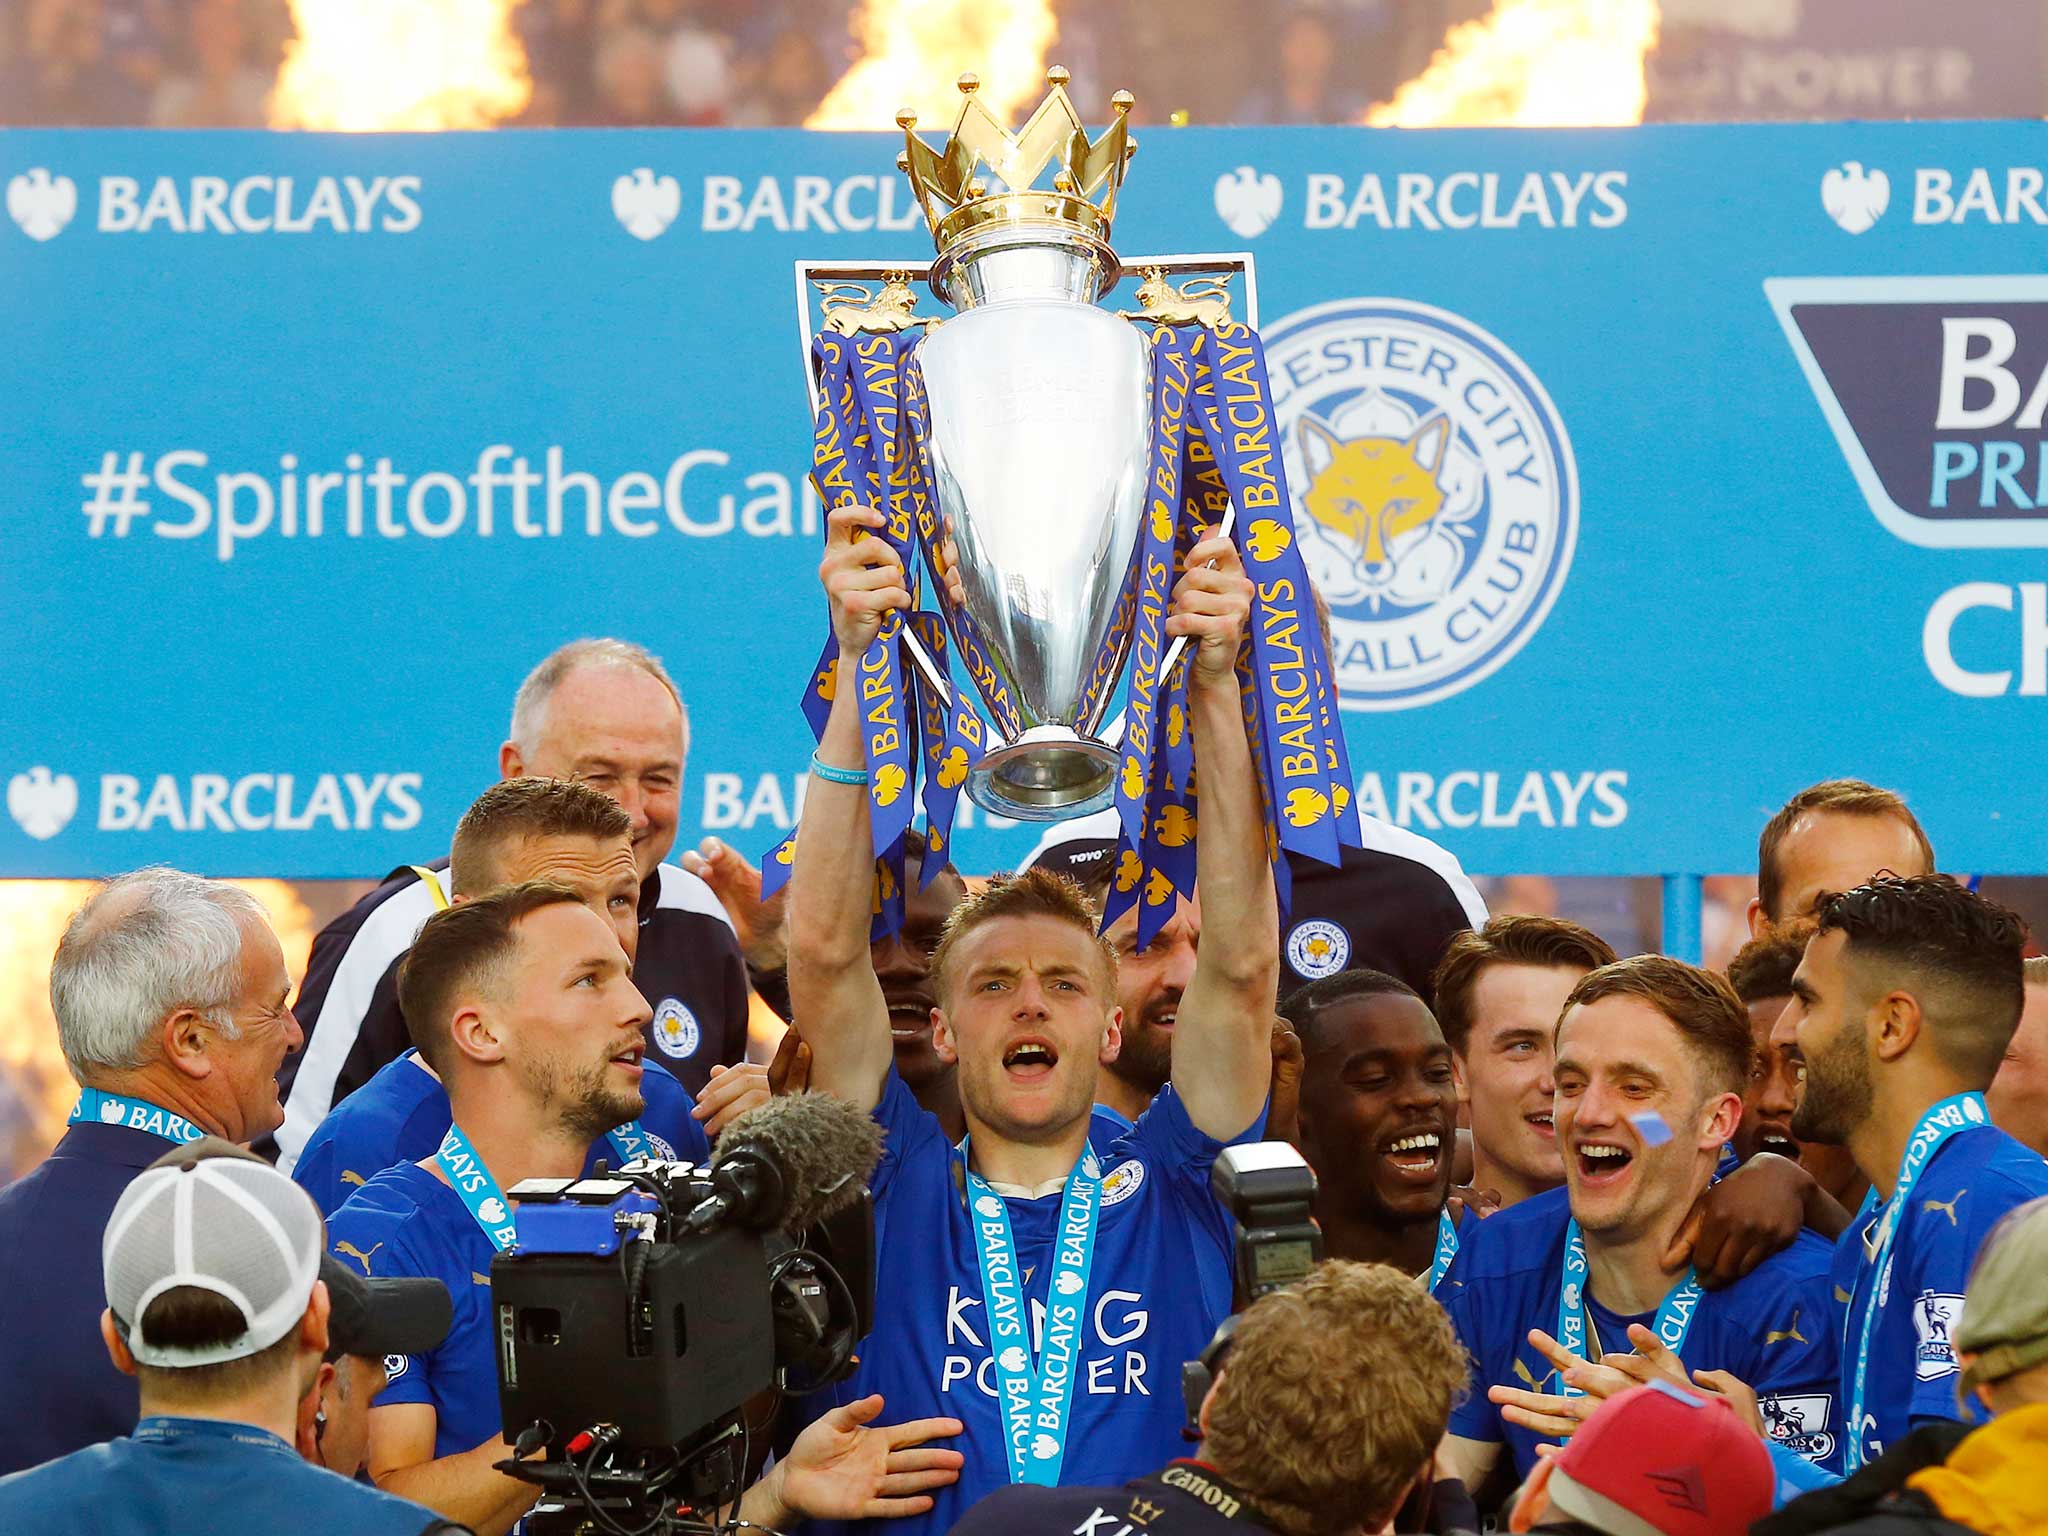 Leicester City's Jamie Vardy lifts the trophy as they celebrate winning the Barclays Premier League